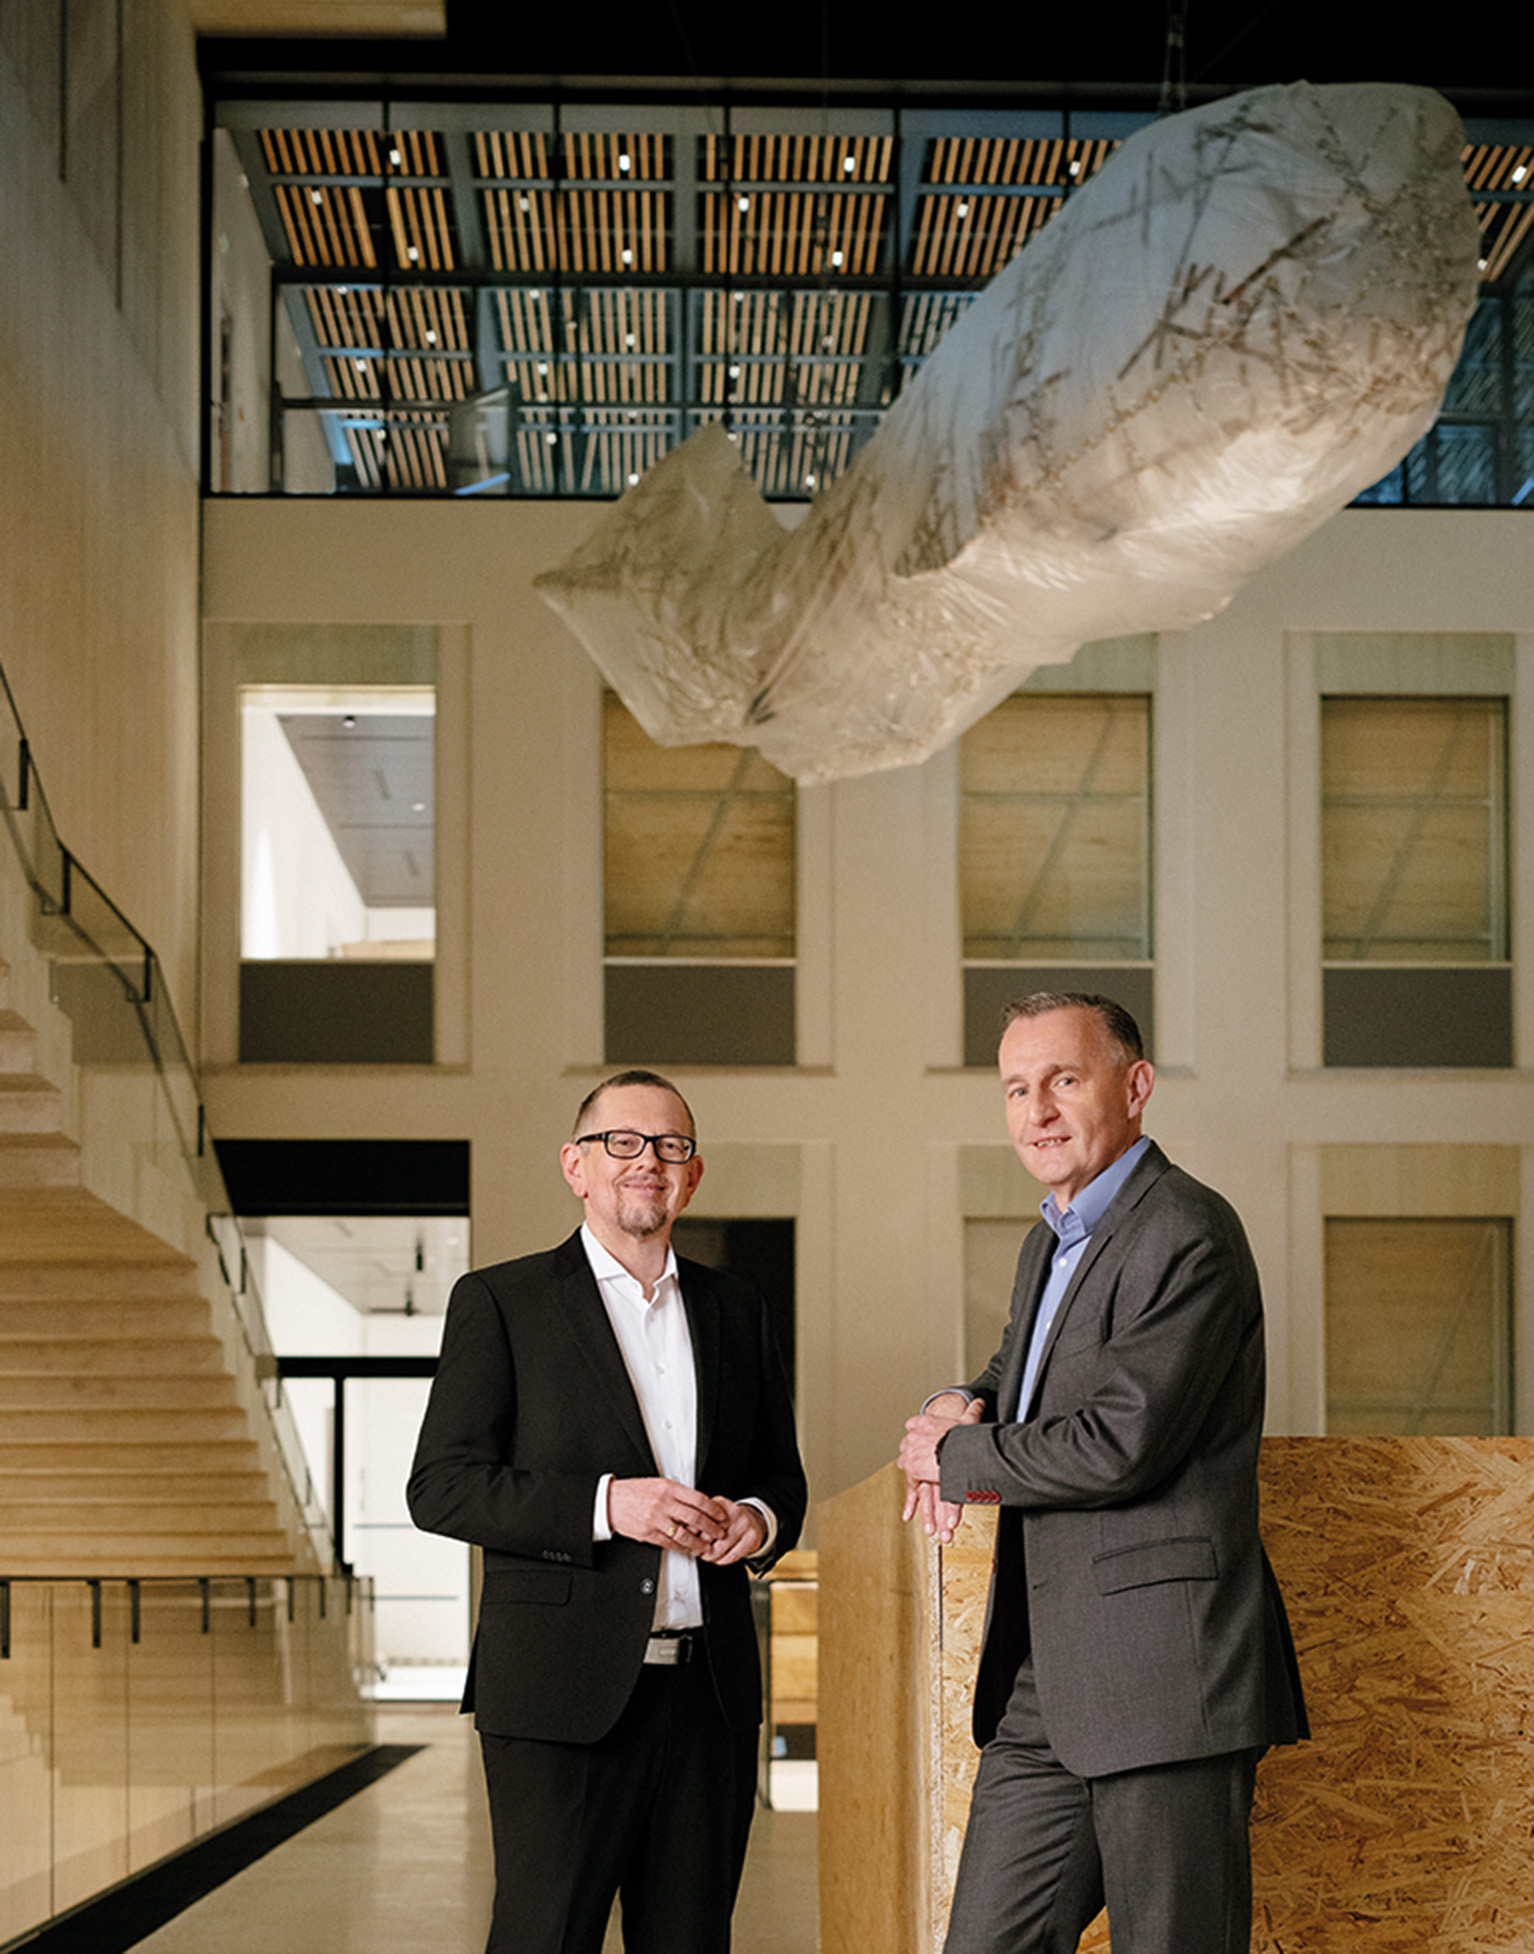 Chief Executive Officer Martin Krajcsir and Deputy Chief Executive Officer Peter Weinelt stand next to each other in the Wien Museum. They look towards the camera.